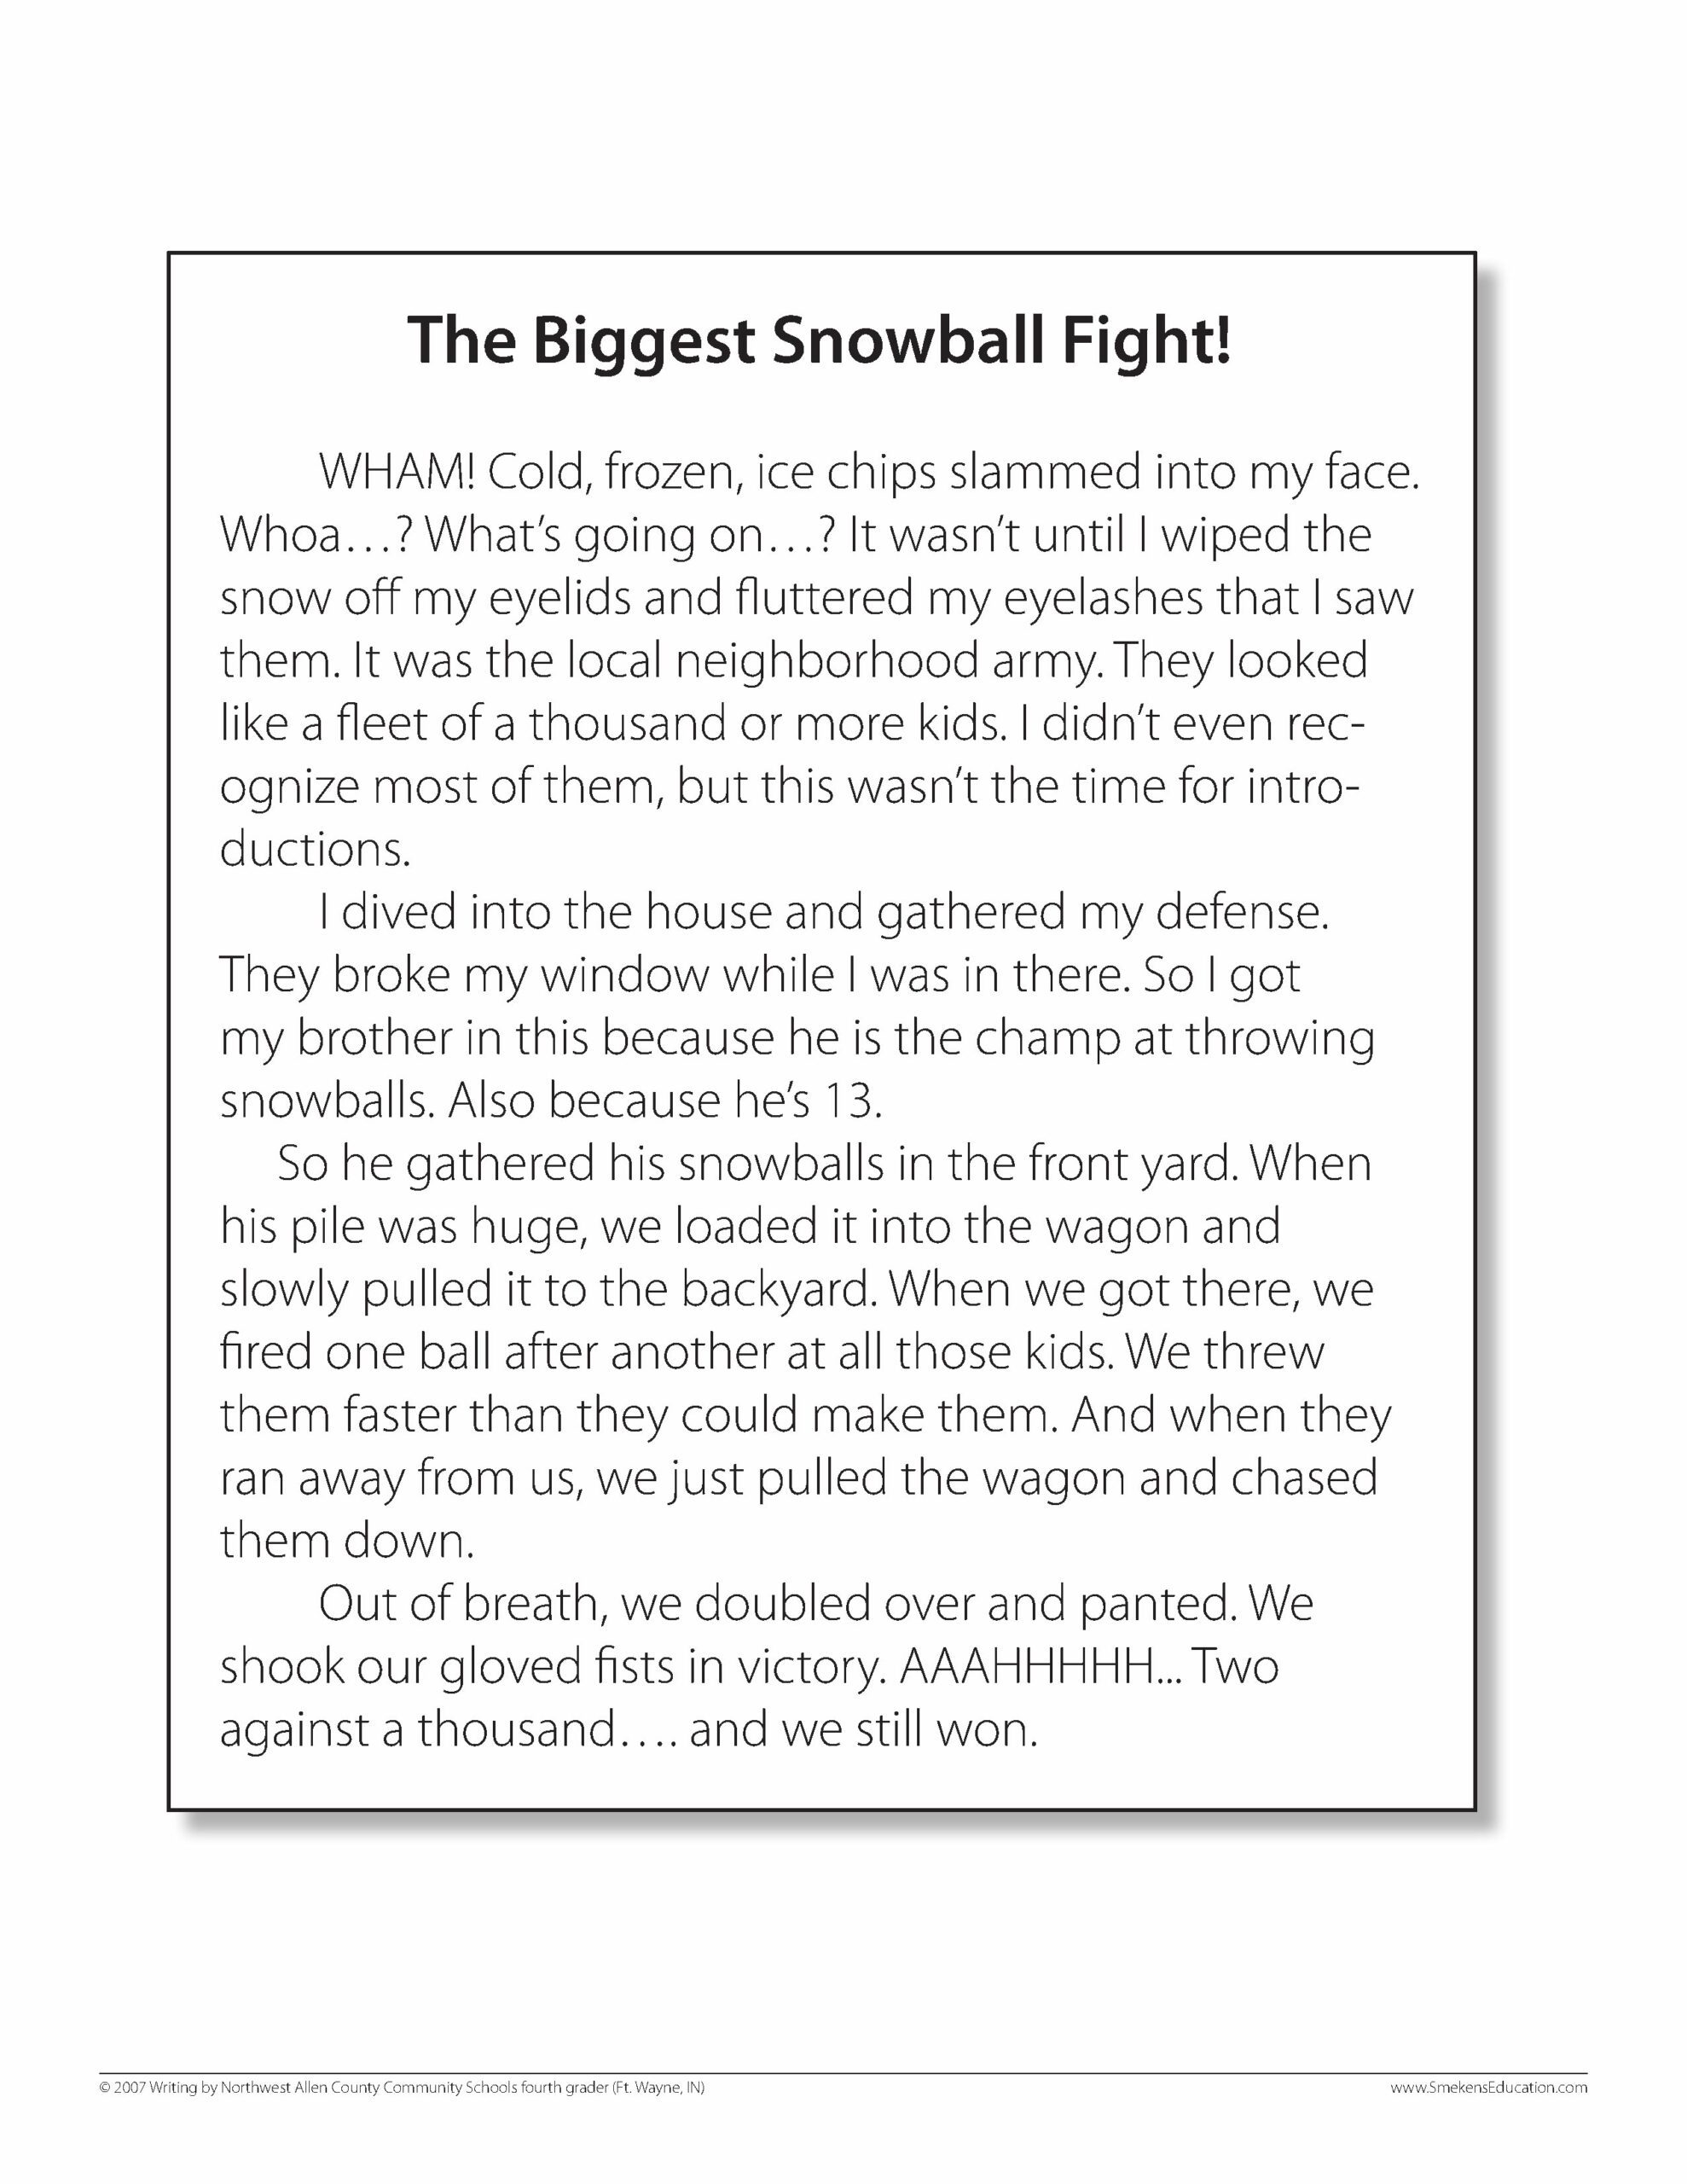 Dissected Web Snowball Fight Revised Draft